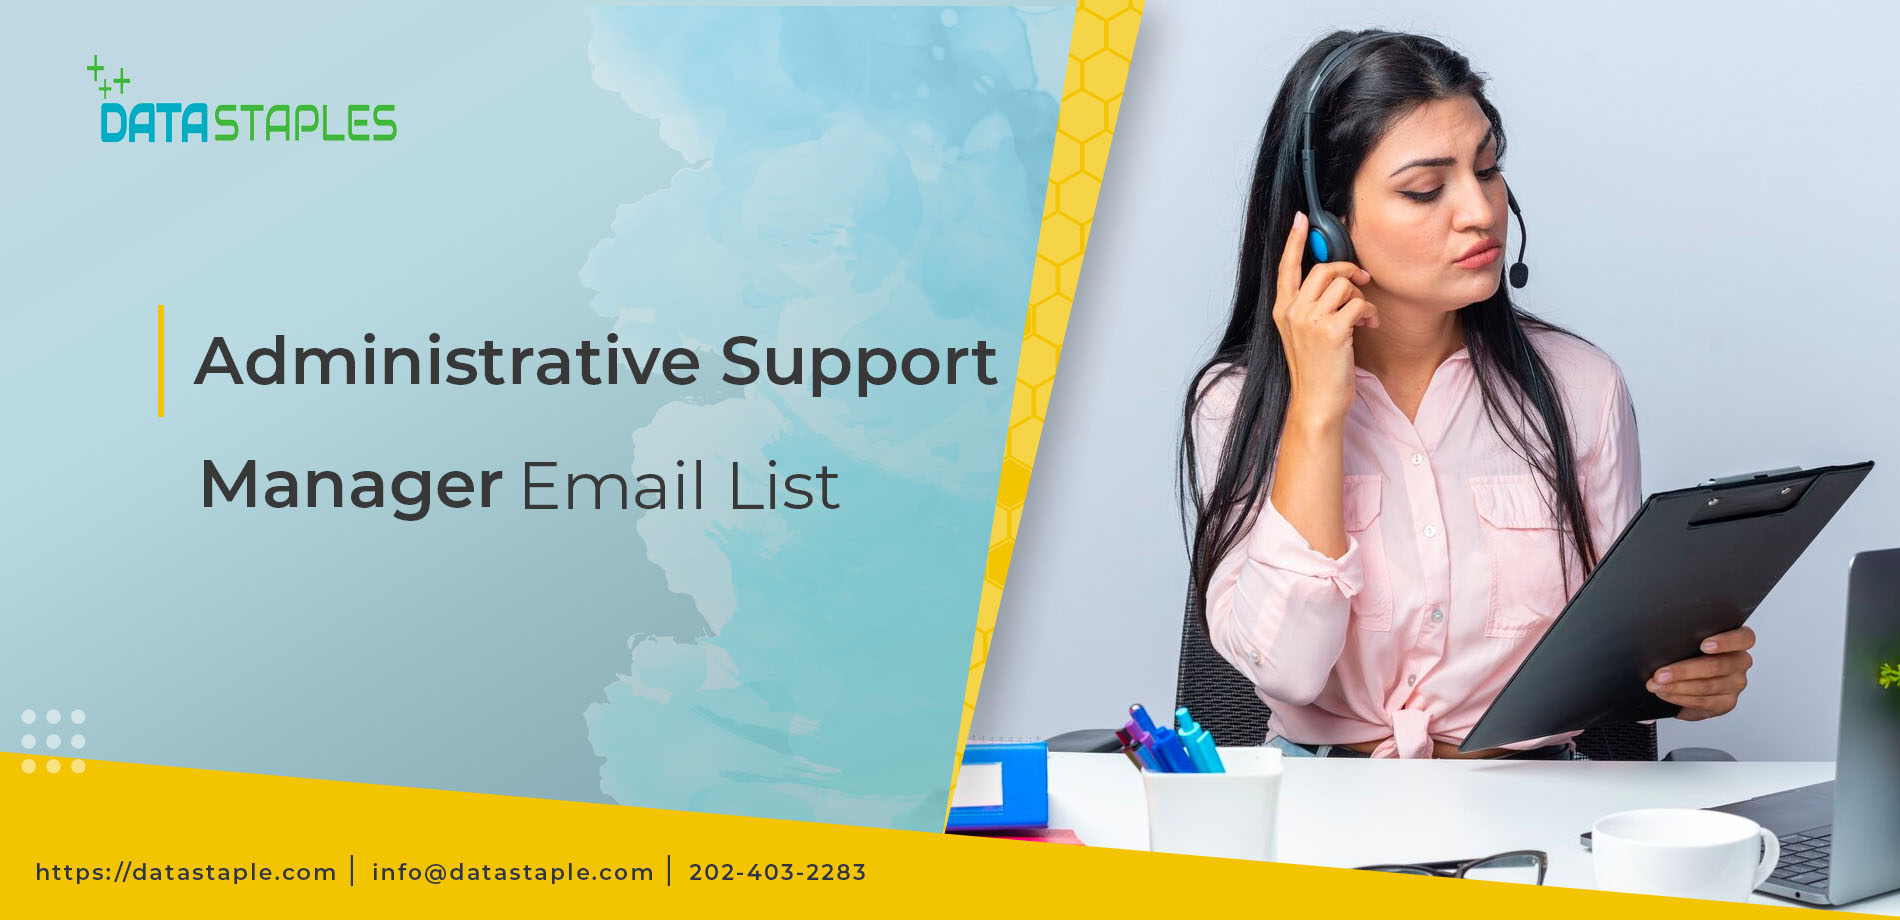 Administrative Support Manager Email List | DataStaples